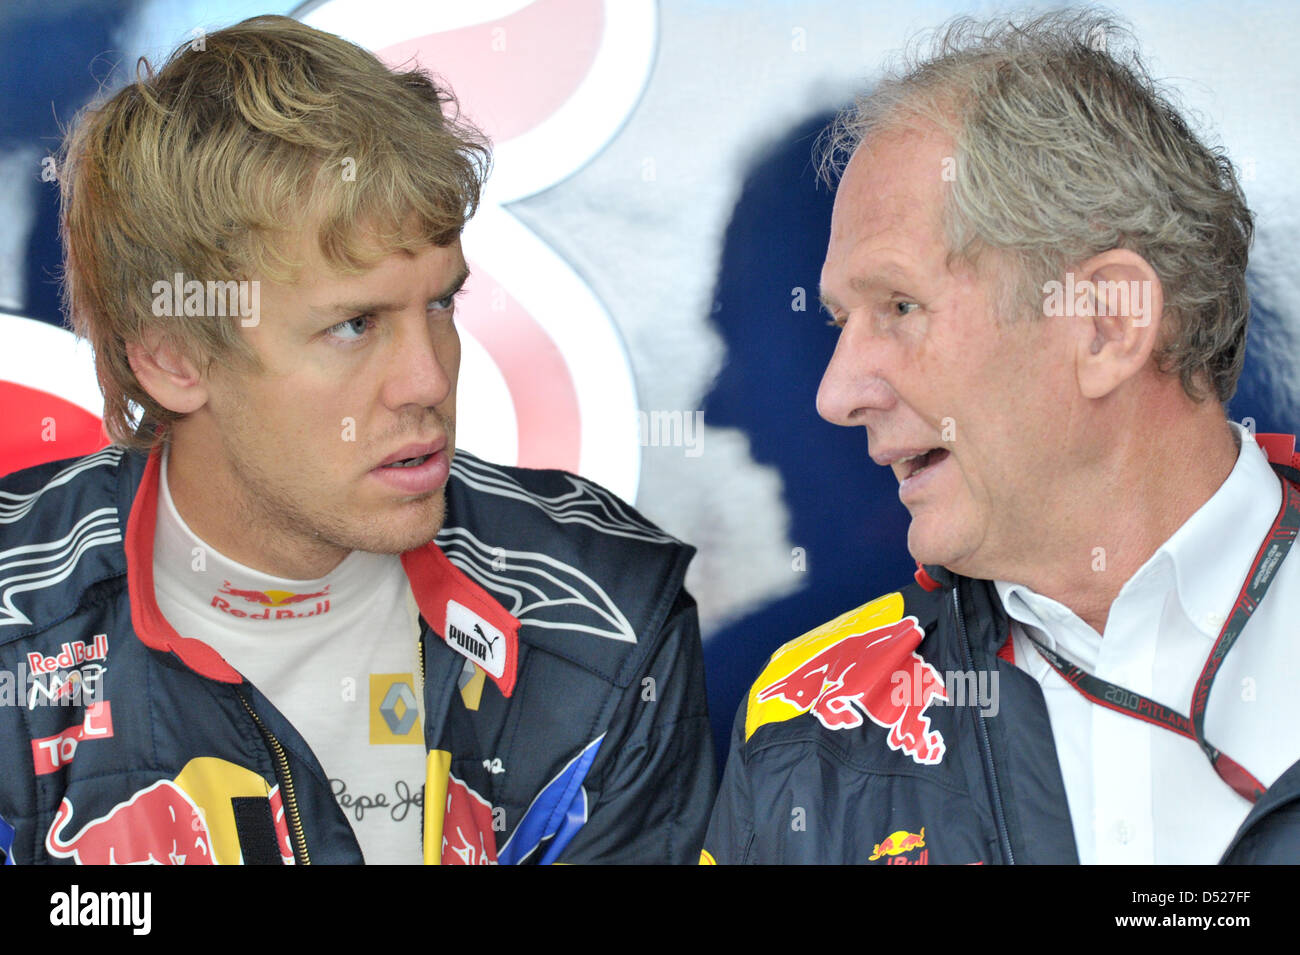 German driver Sebastian Vettel (L) of Red Bull and Helmut Marko, motorsports director of Red Bull, talk to each other during a training session at the Korea Internation Circuit in Yeongam, South Korea, 23 October 2010. The maiden Formula One Korean Grand Prix is held on 24 October 2010. Photo: David Ebener Stock Photo